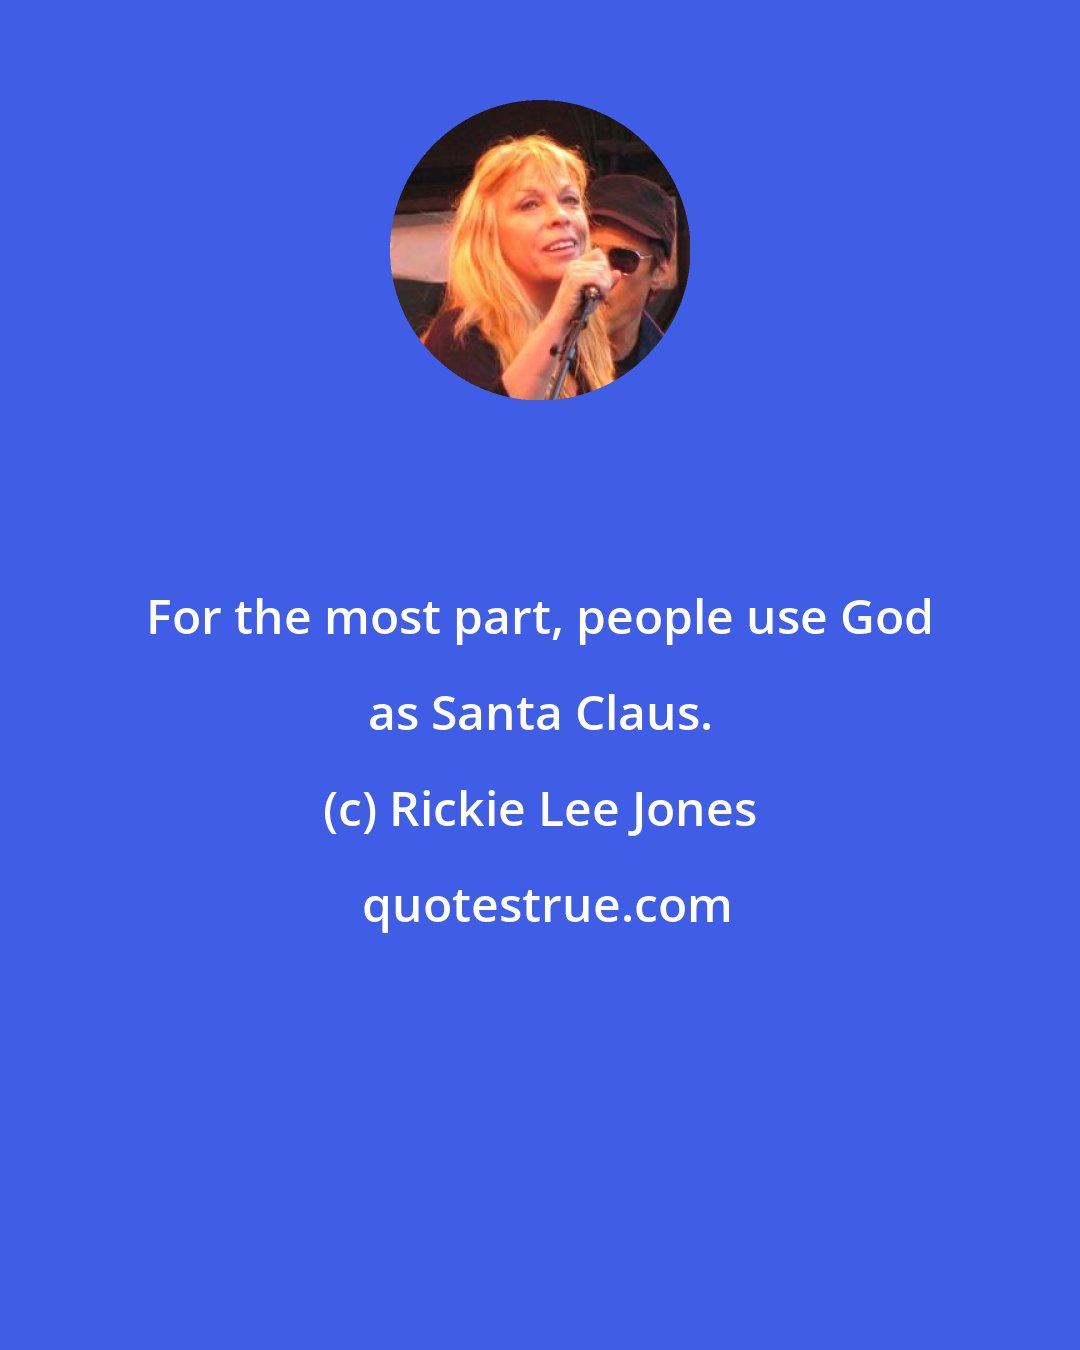 Rickie Lee Jones: For the most part, people use God as Santa Claus.